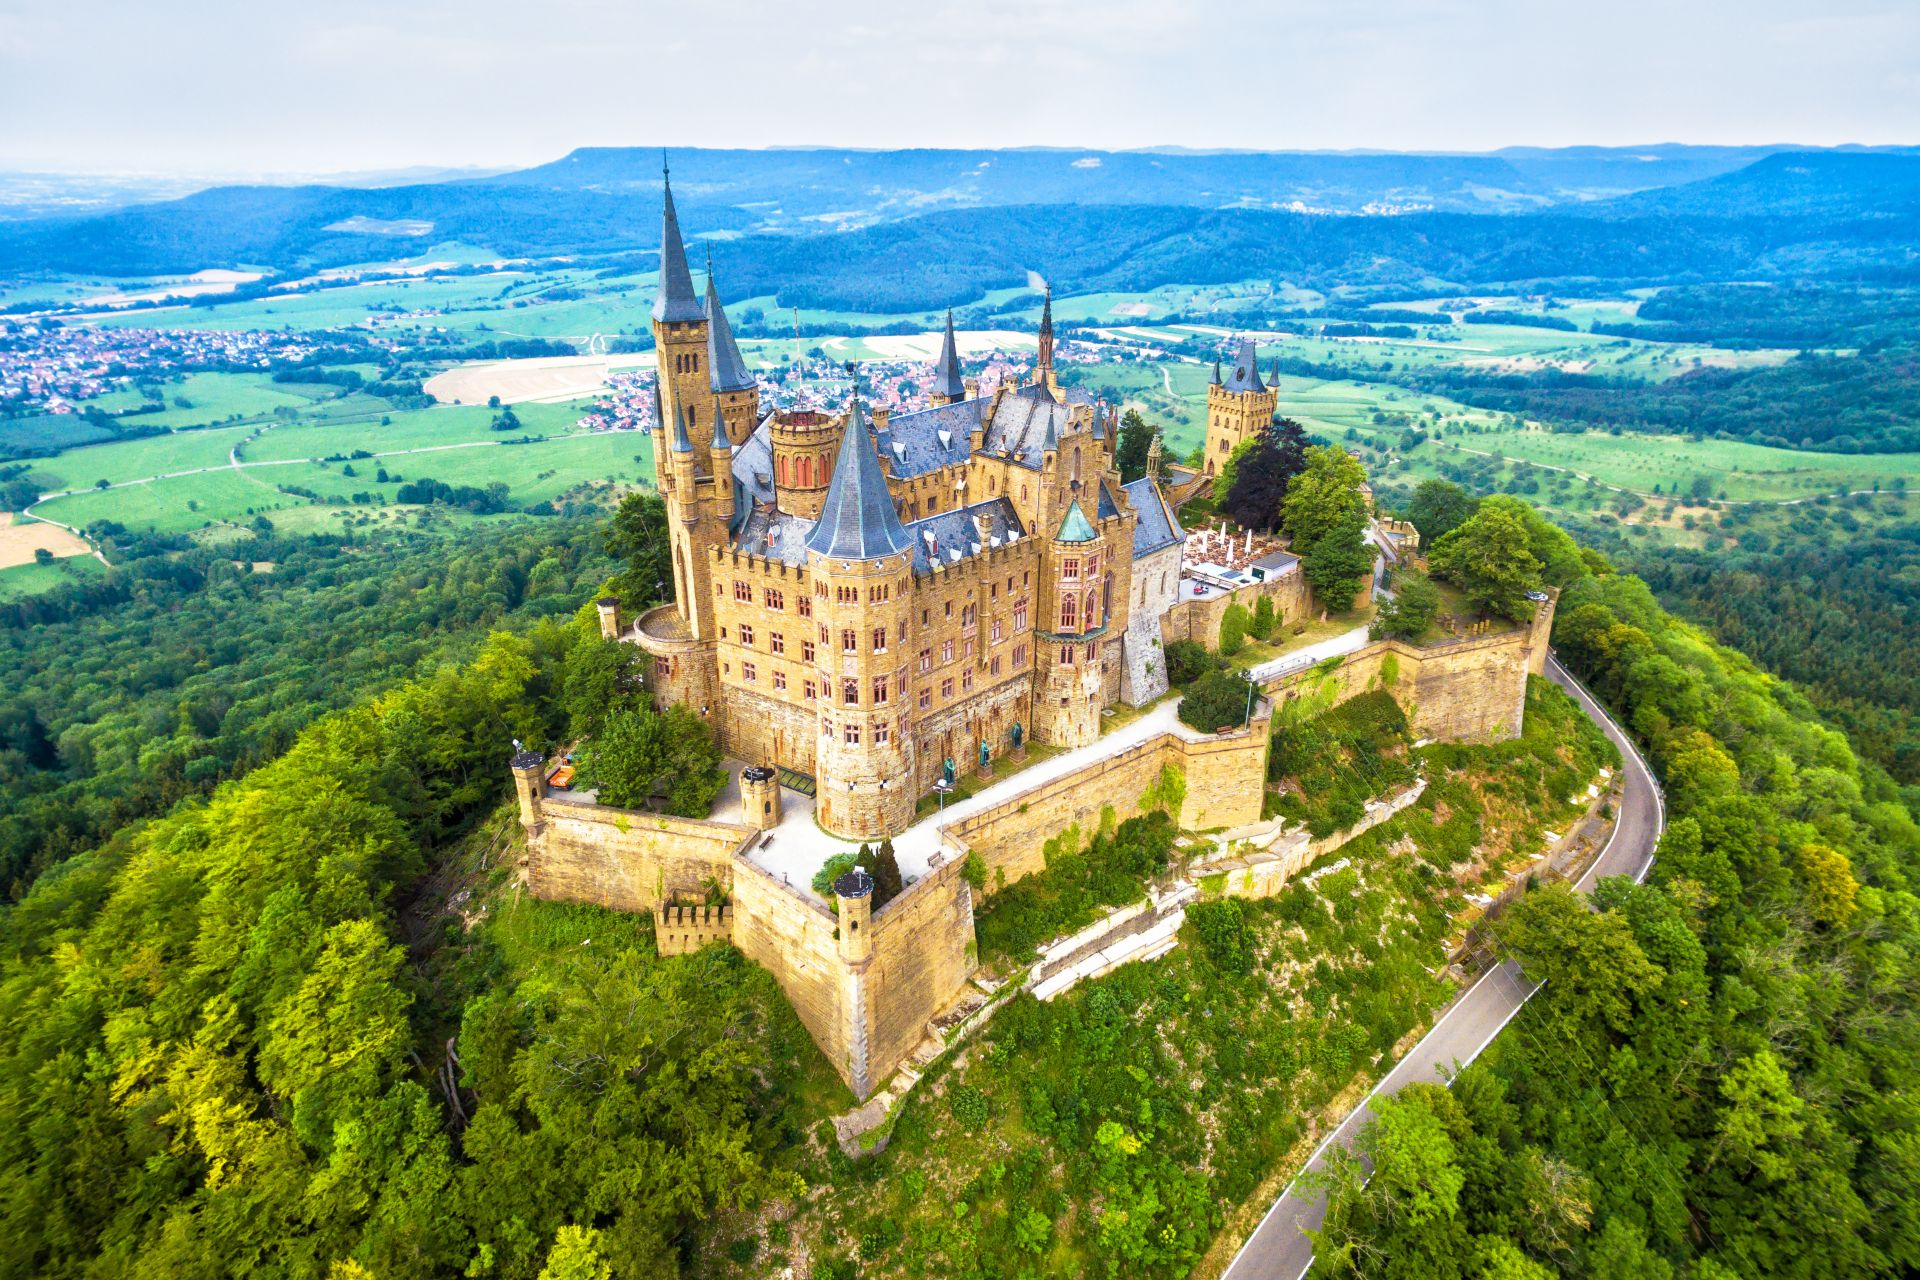 Hohenzollern castle on mountain, Germanys